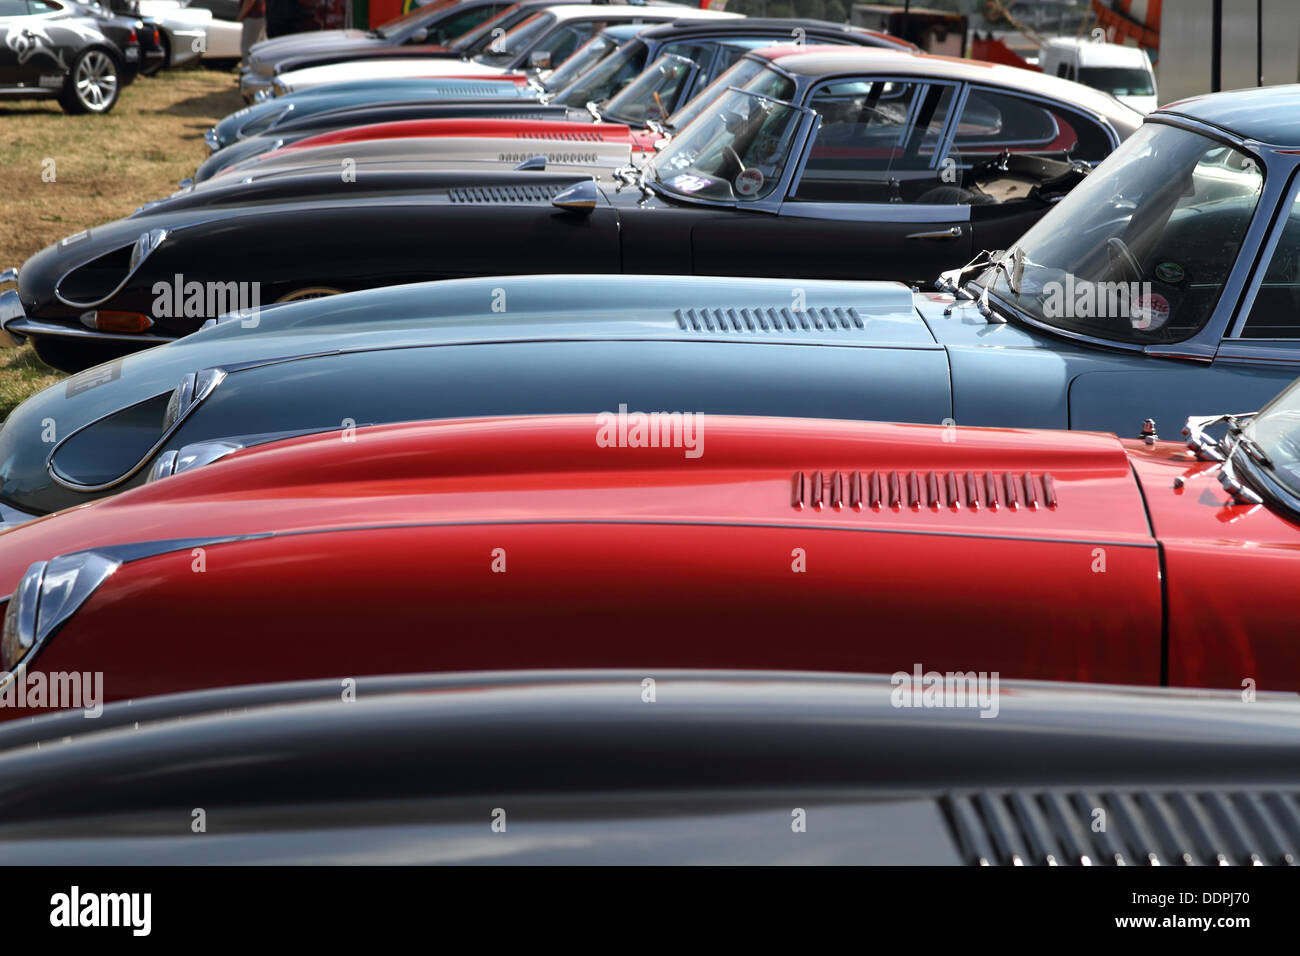 A Collection of Jaguar E-Type Sports Cars Stock Photo